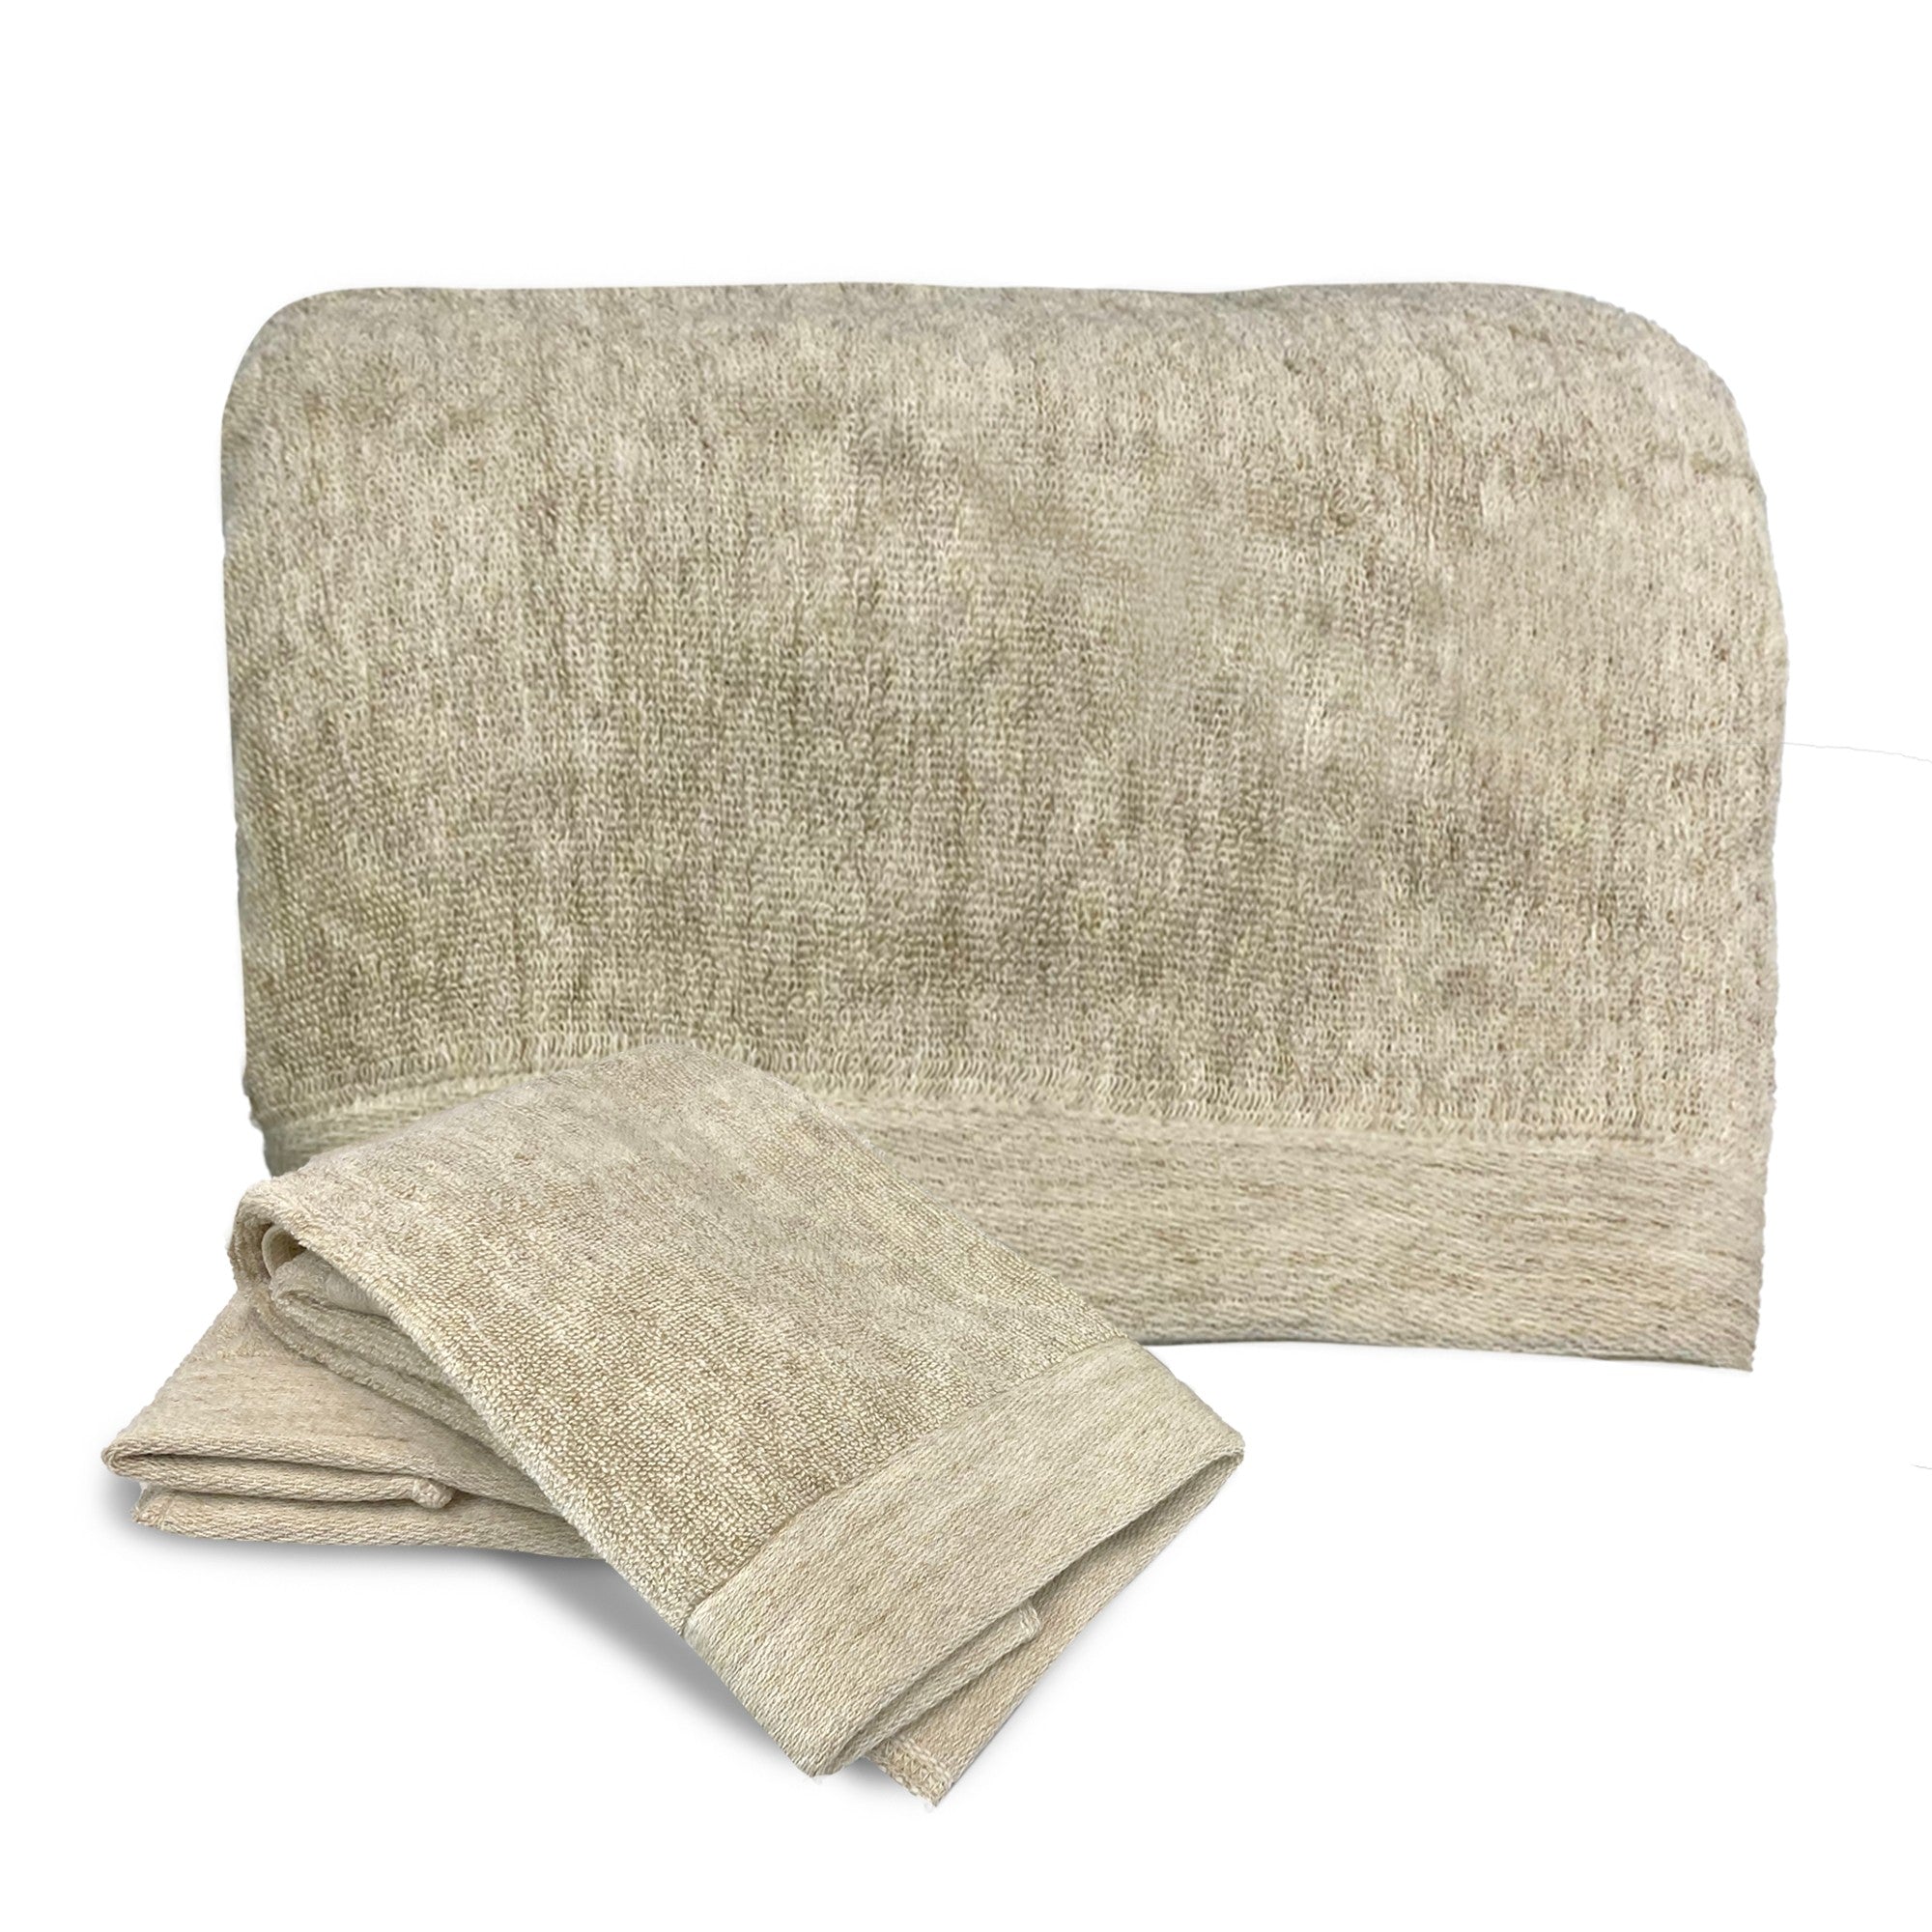 MELANGE Bamboo 3Pcs Set - Resistant to Bacteria, Mildew and Odors, Perfect for Sensitive Skin  - Sand